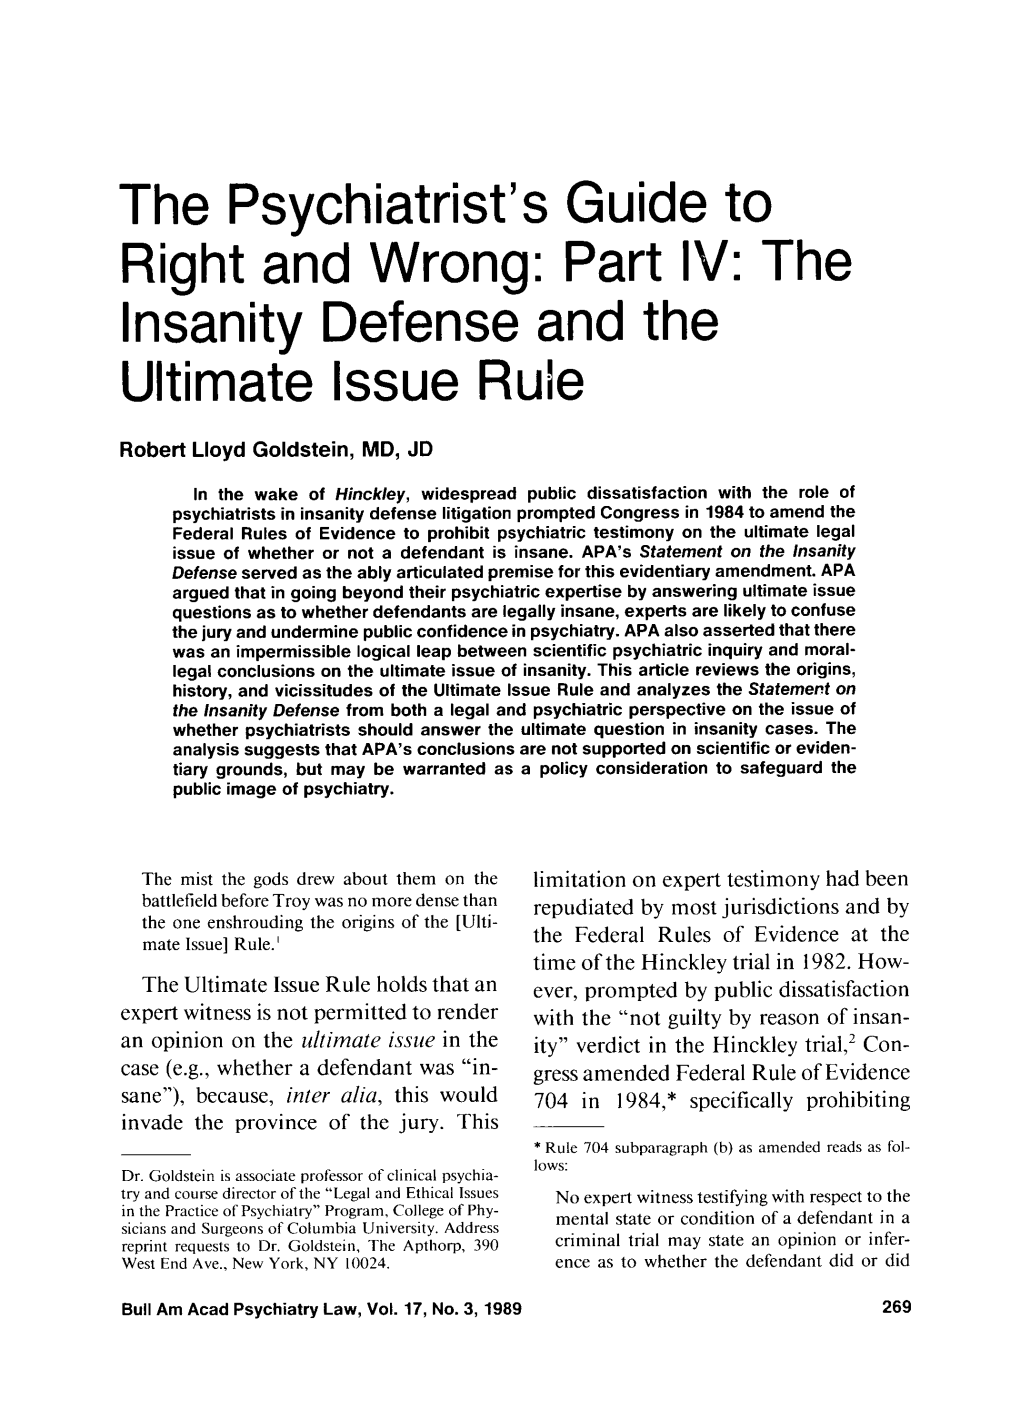 The Psychiatrist's Right and Wrong: Guide to Part IV: the Lnsanity Ultimate Defense and the Lssue Rule